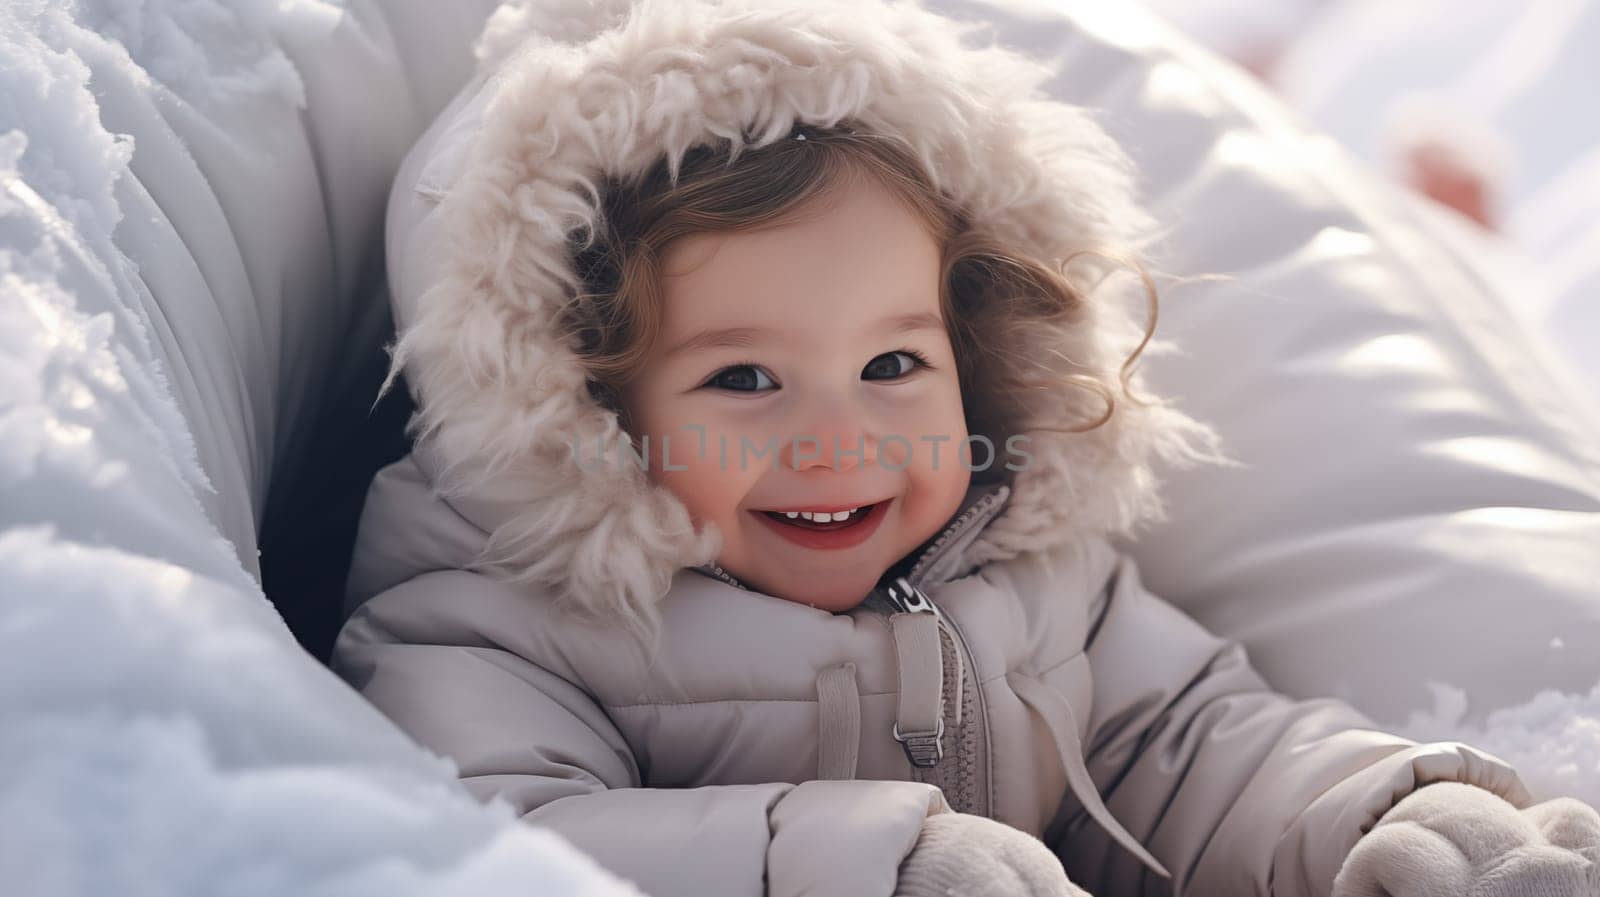 Cute happy toddler with a windy winter jacket with hood, sitting in a warm blanket in winter, outdoors.